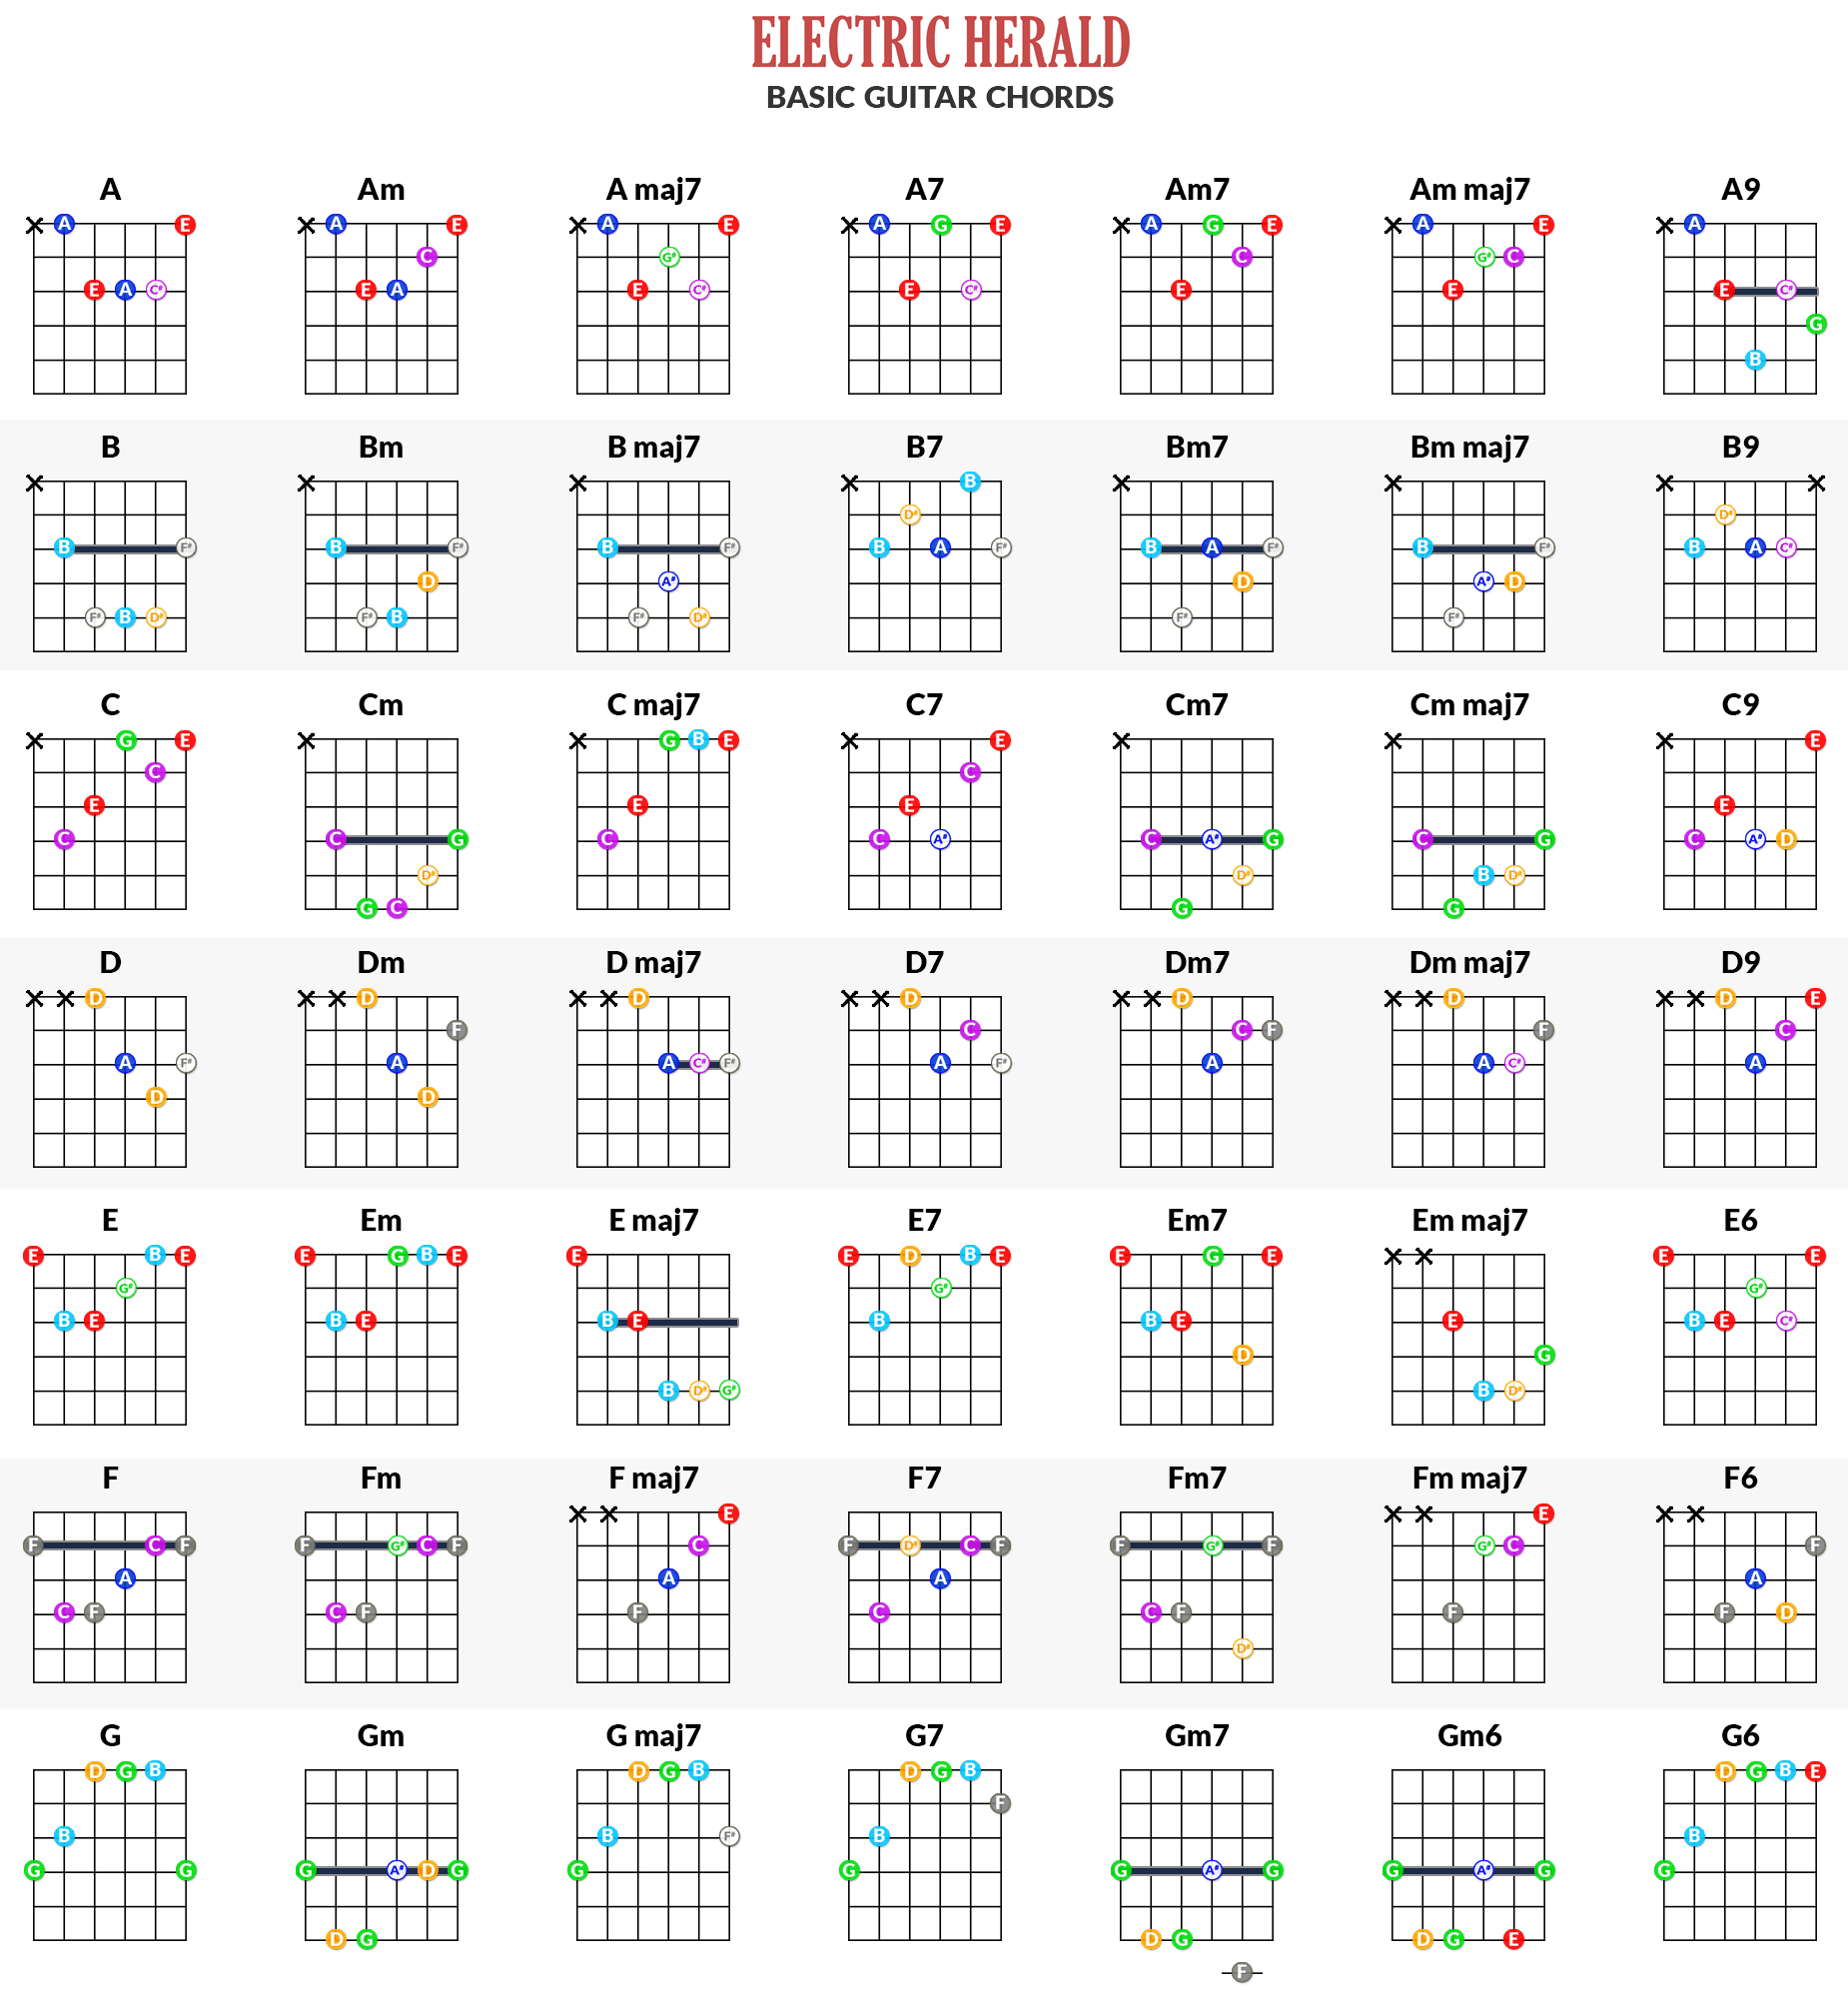 Basic Guitar Chords Online Guitar Chords Chart Free App Electric Herald